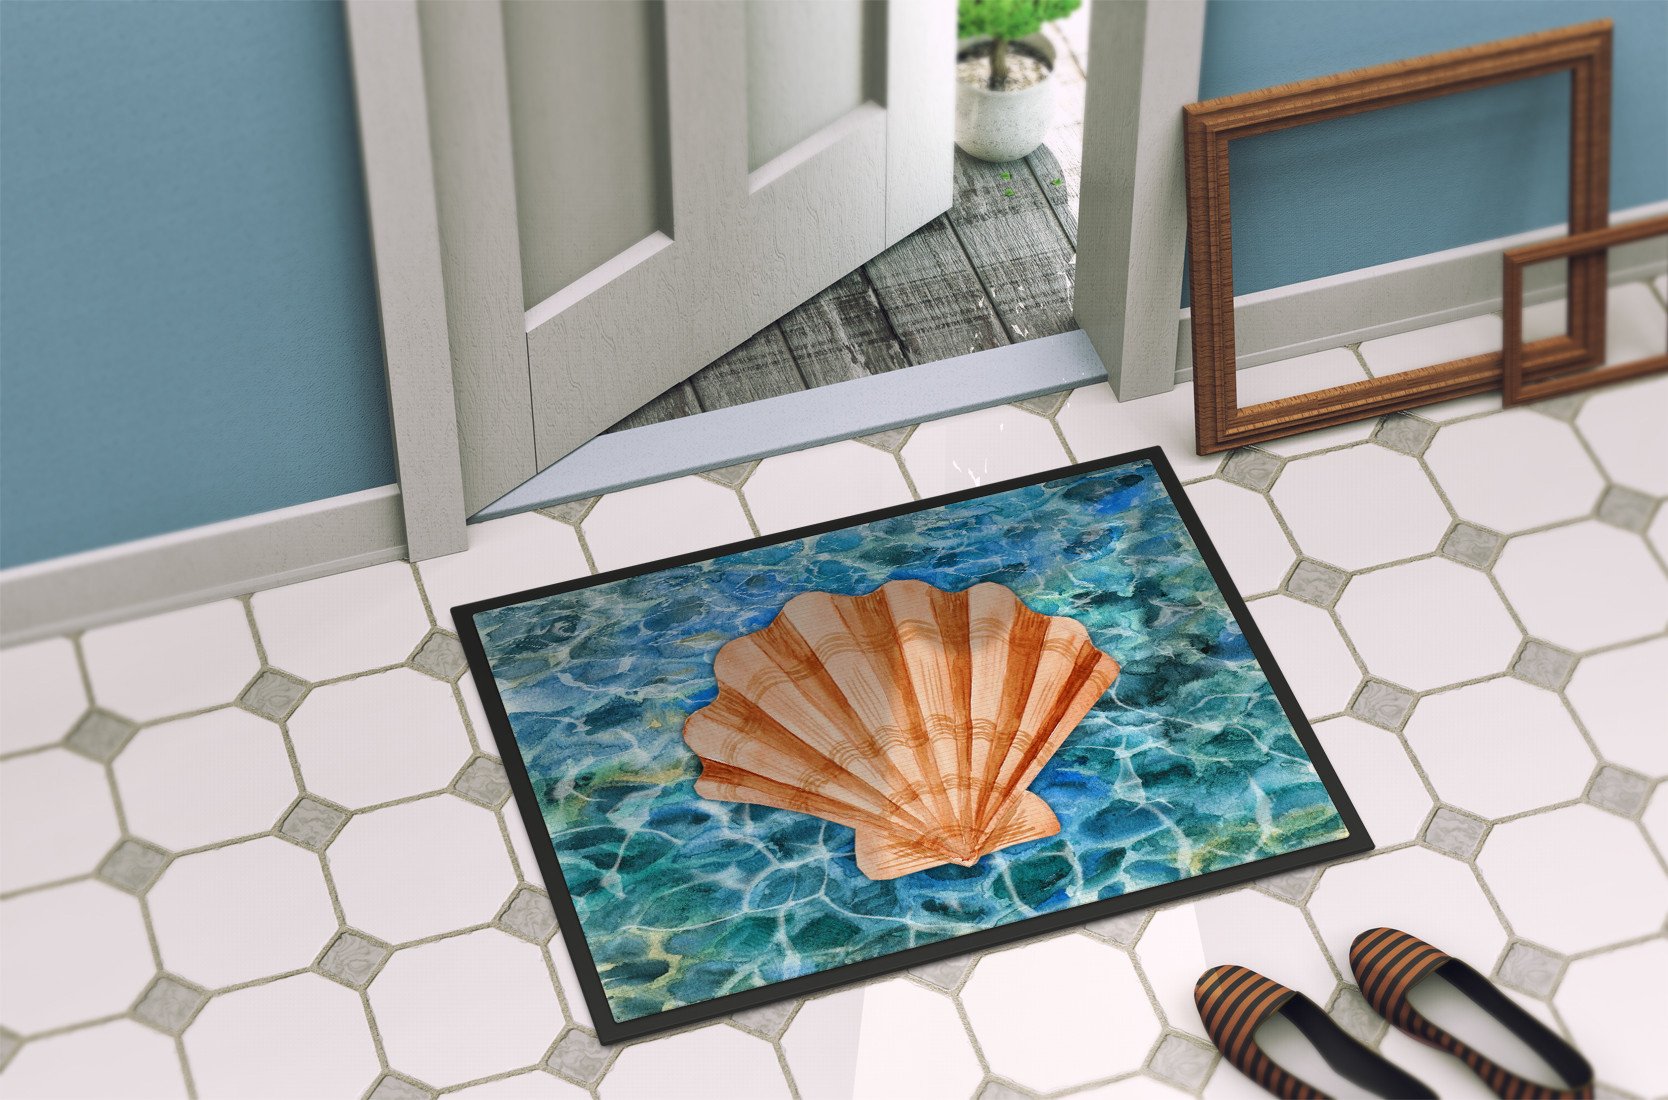 Scallop Shell and Water Indoor or Outdoor Mat 24x36 BB5367JMAT by Caroline's Treasures